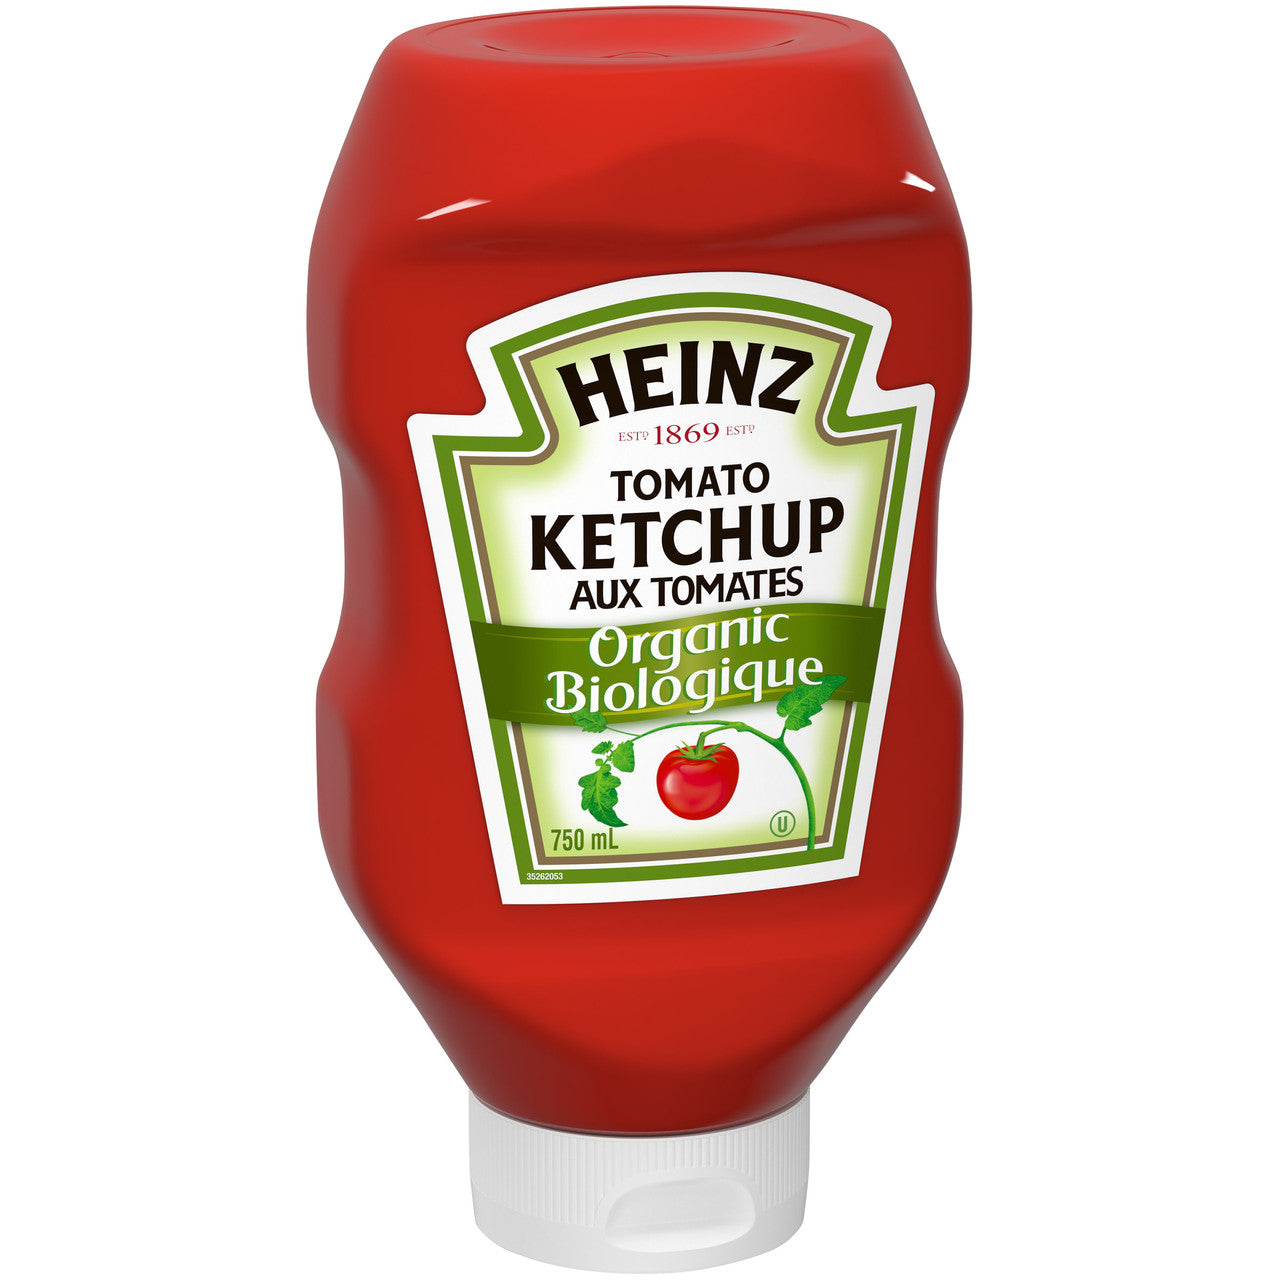 HEINZ Organic Ketchup - Inverted Bottle 750ml/25.4 oz., (2 Pack) {Imported from Canada}